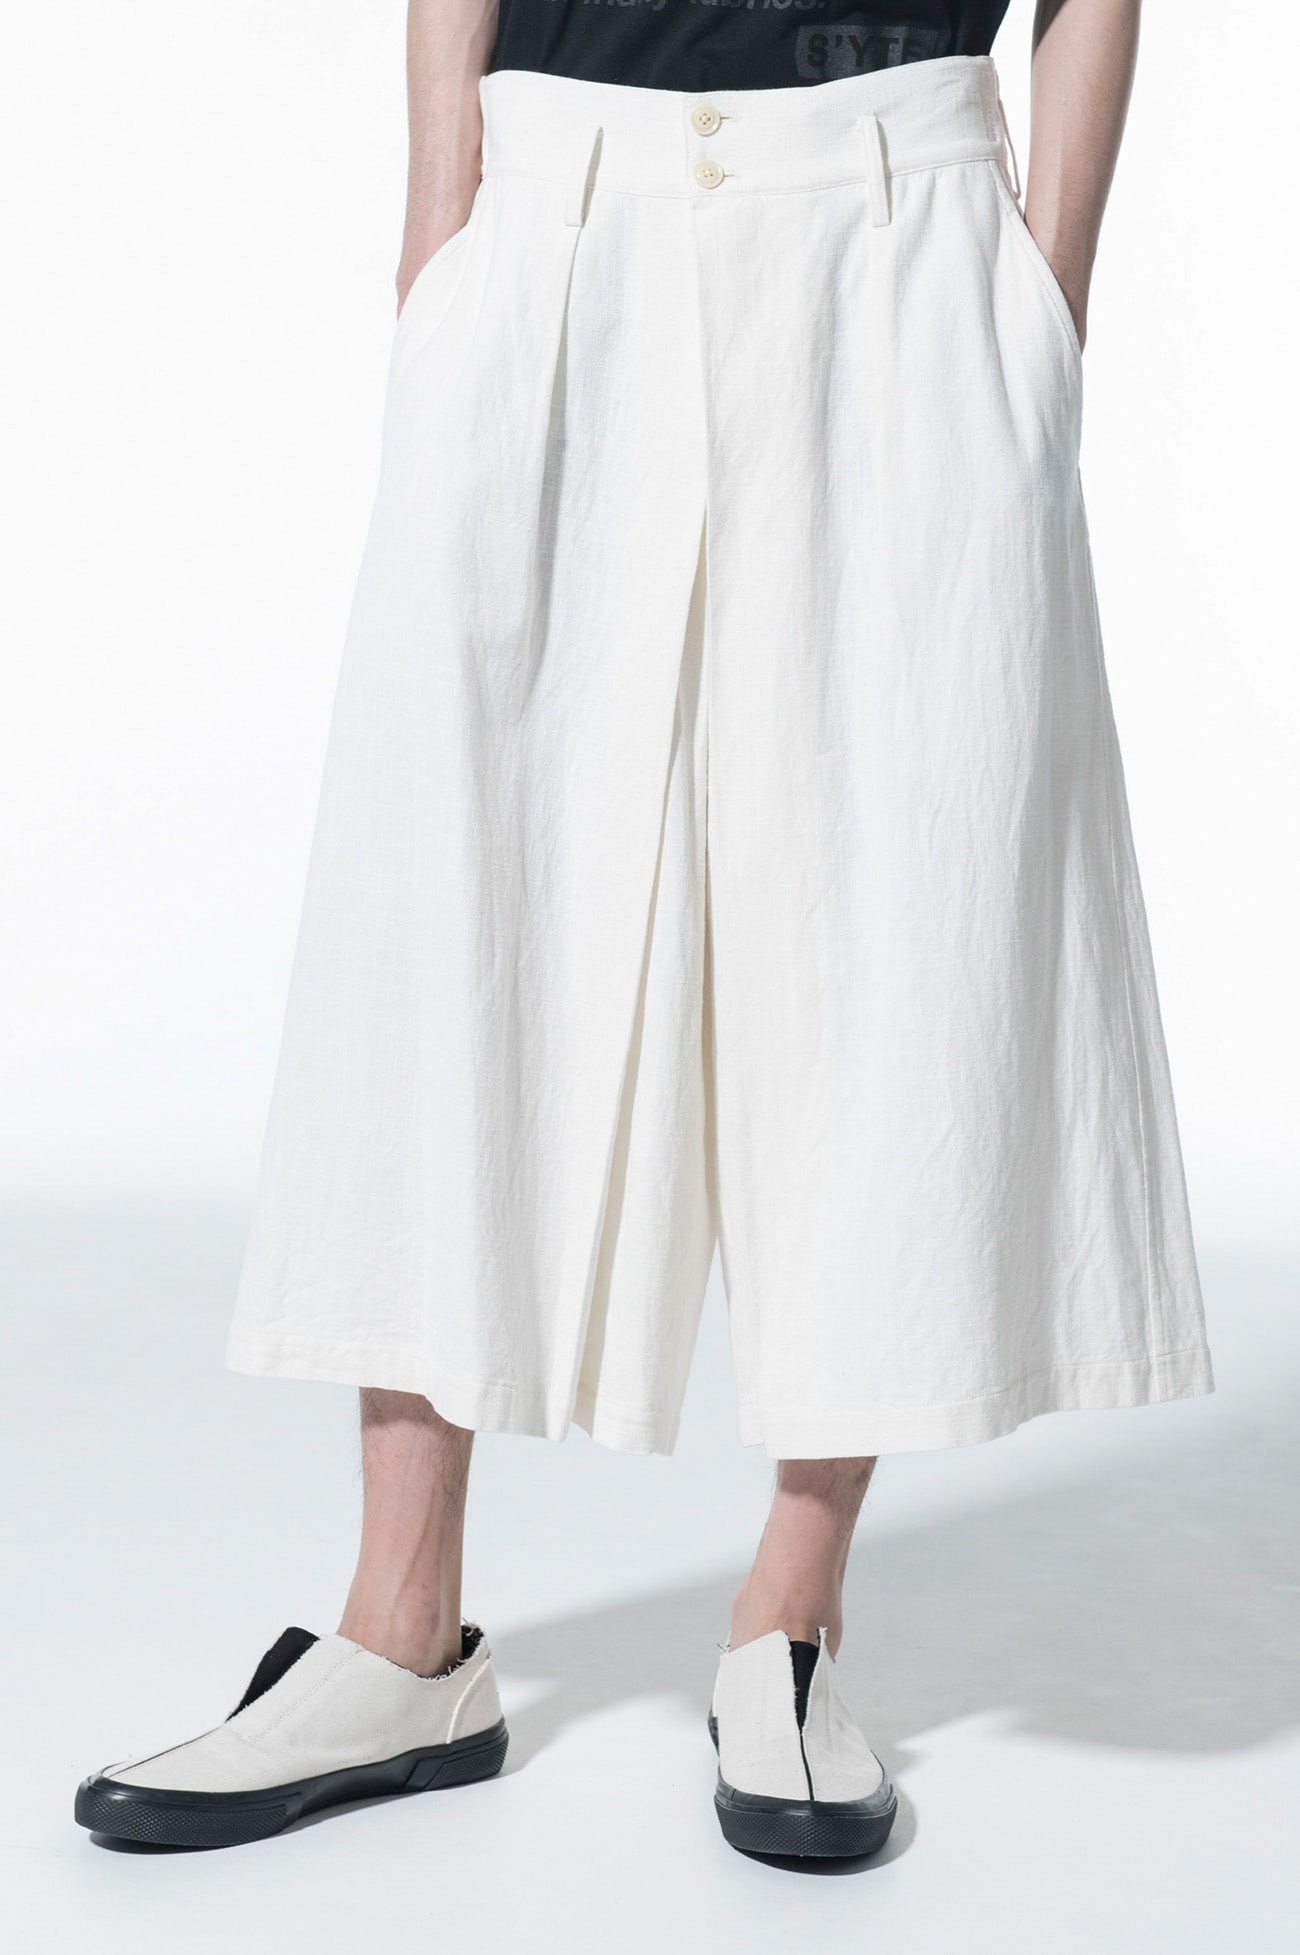 INDIAN KHADI CROPPED HAKAMA PANTS WITH PLEATS(M White): S'YTE｜THE